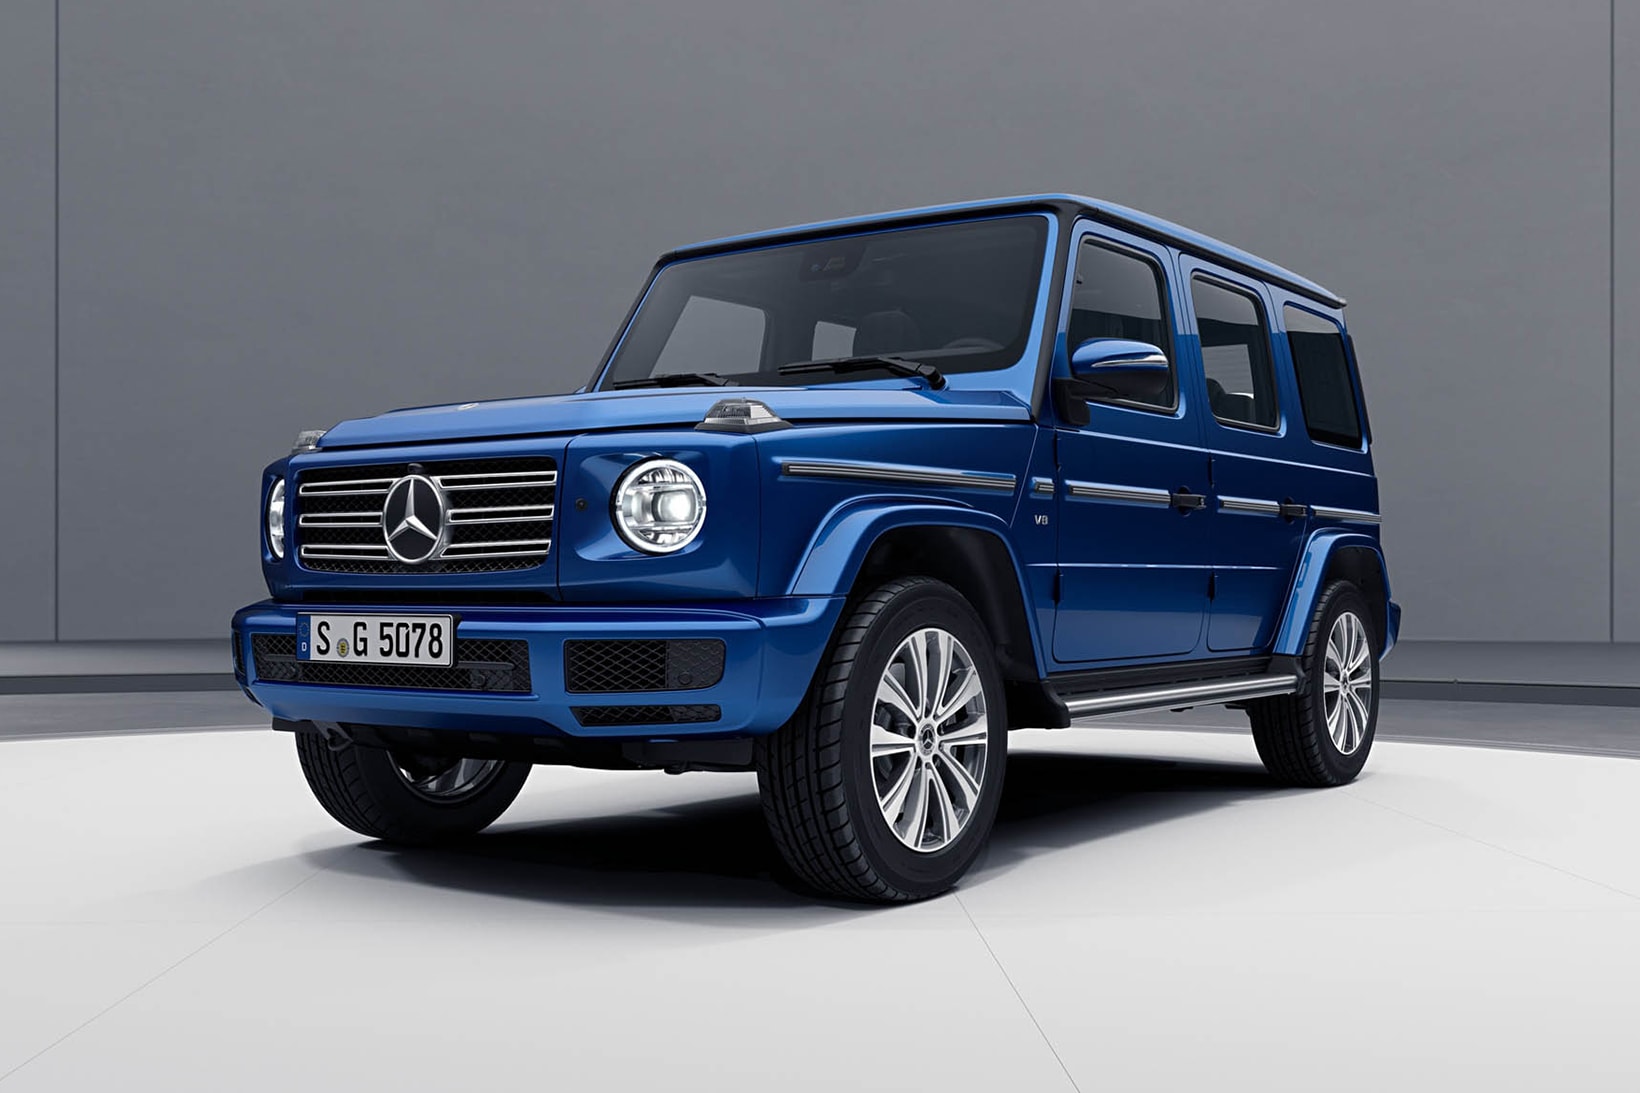 Mercedes Benz G Class Stainless Steel Package option 2018 car body detailing tease 500 v8